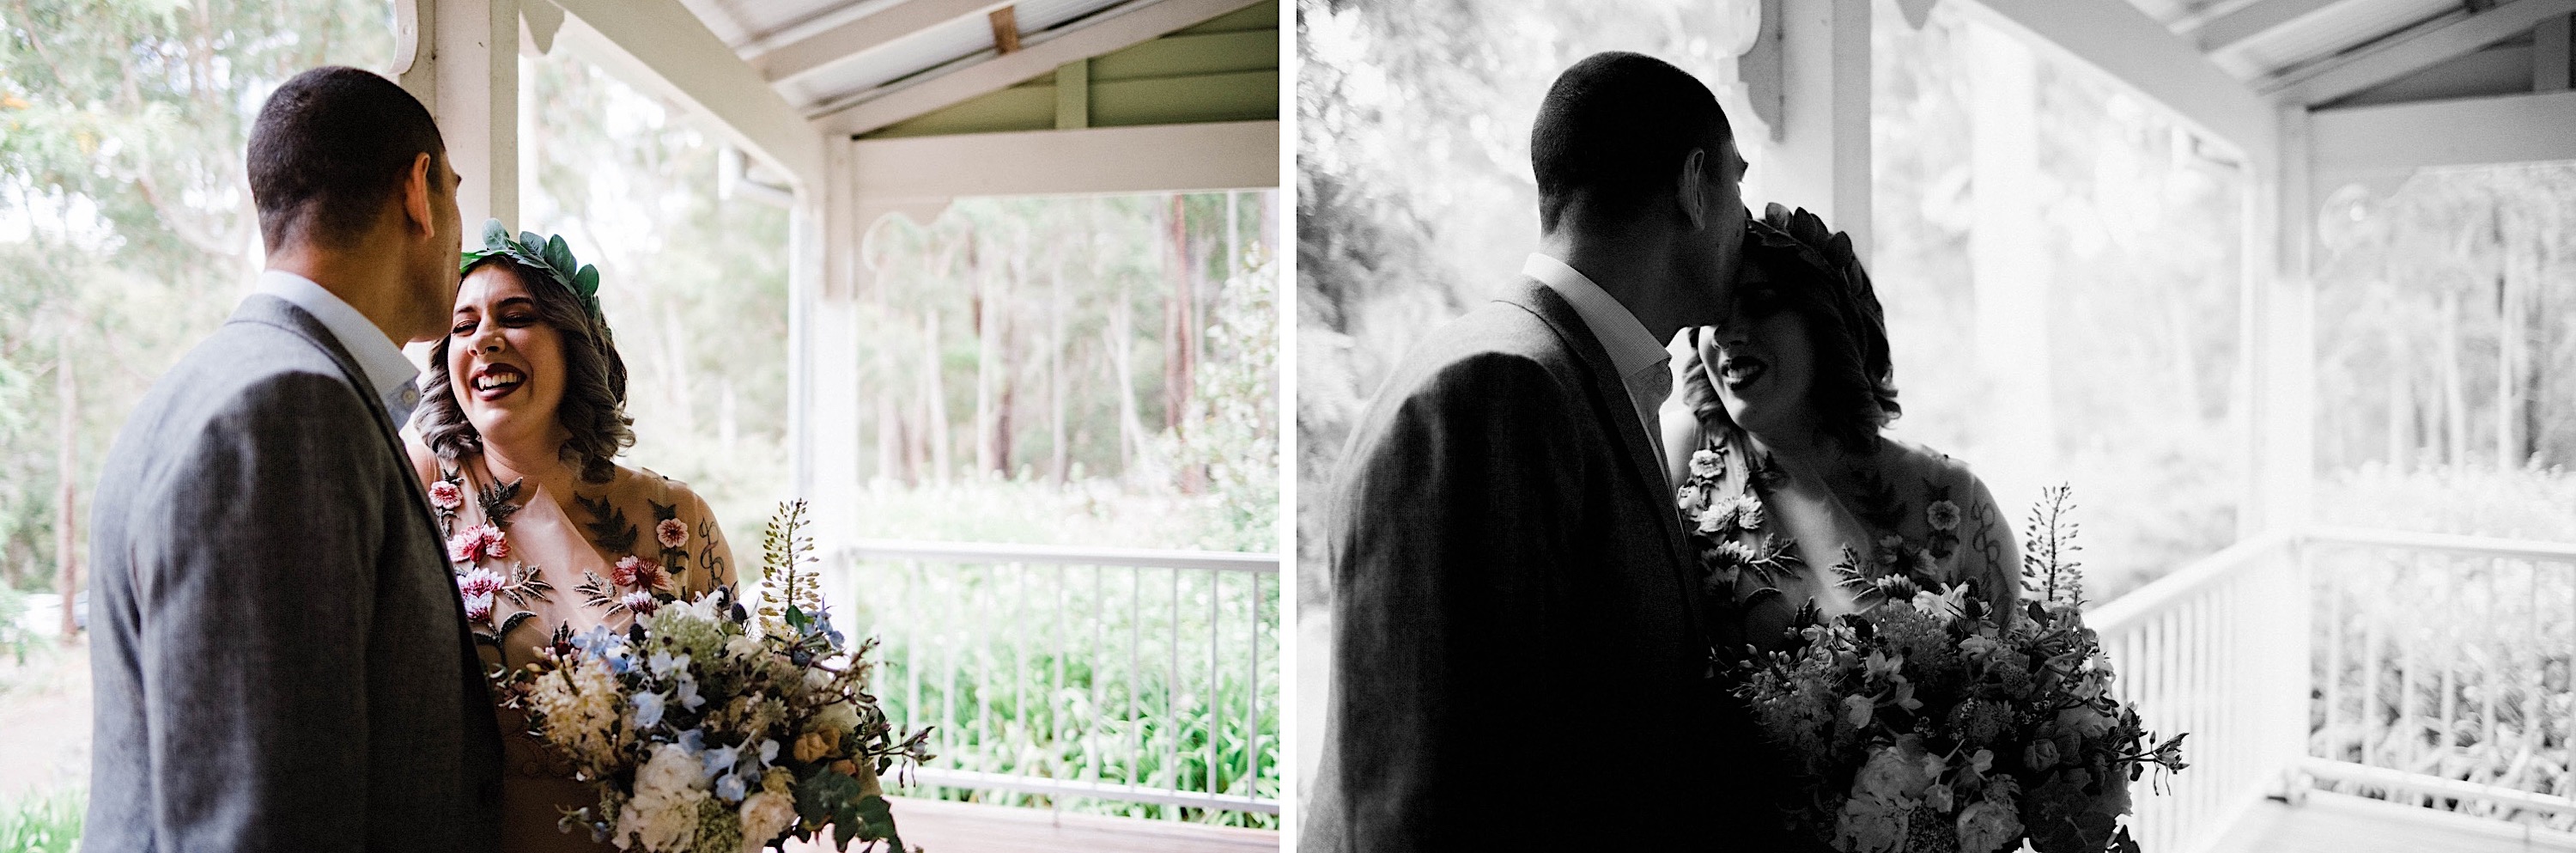 Documentary wedding photography of the bride & her father sharing a moment before her Donnelly River Wedding Ceremony.